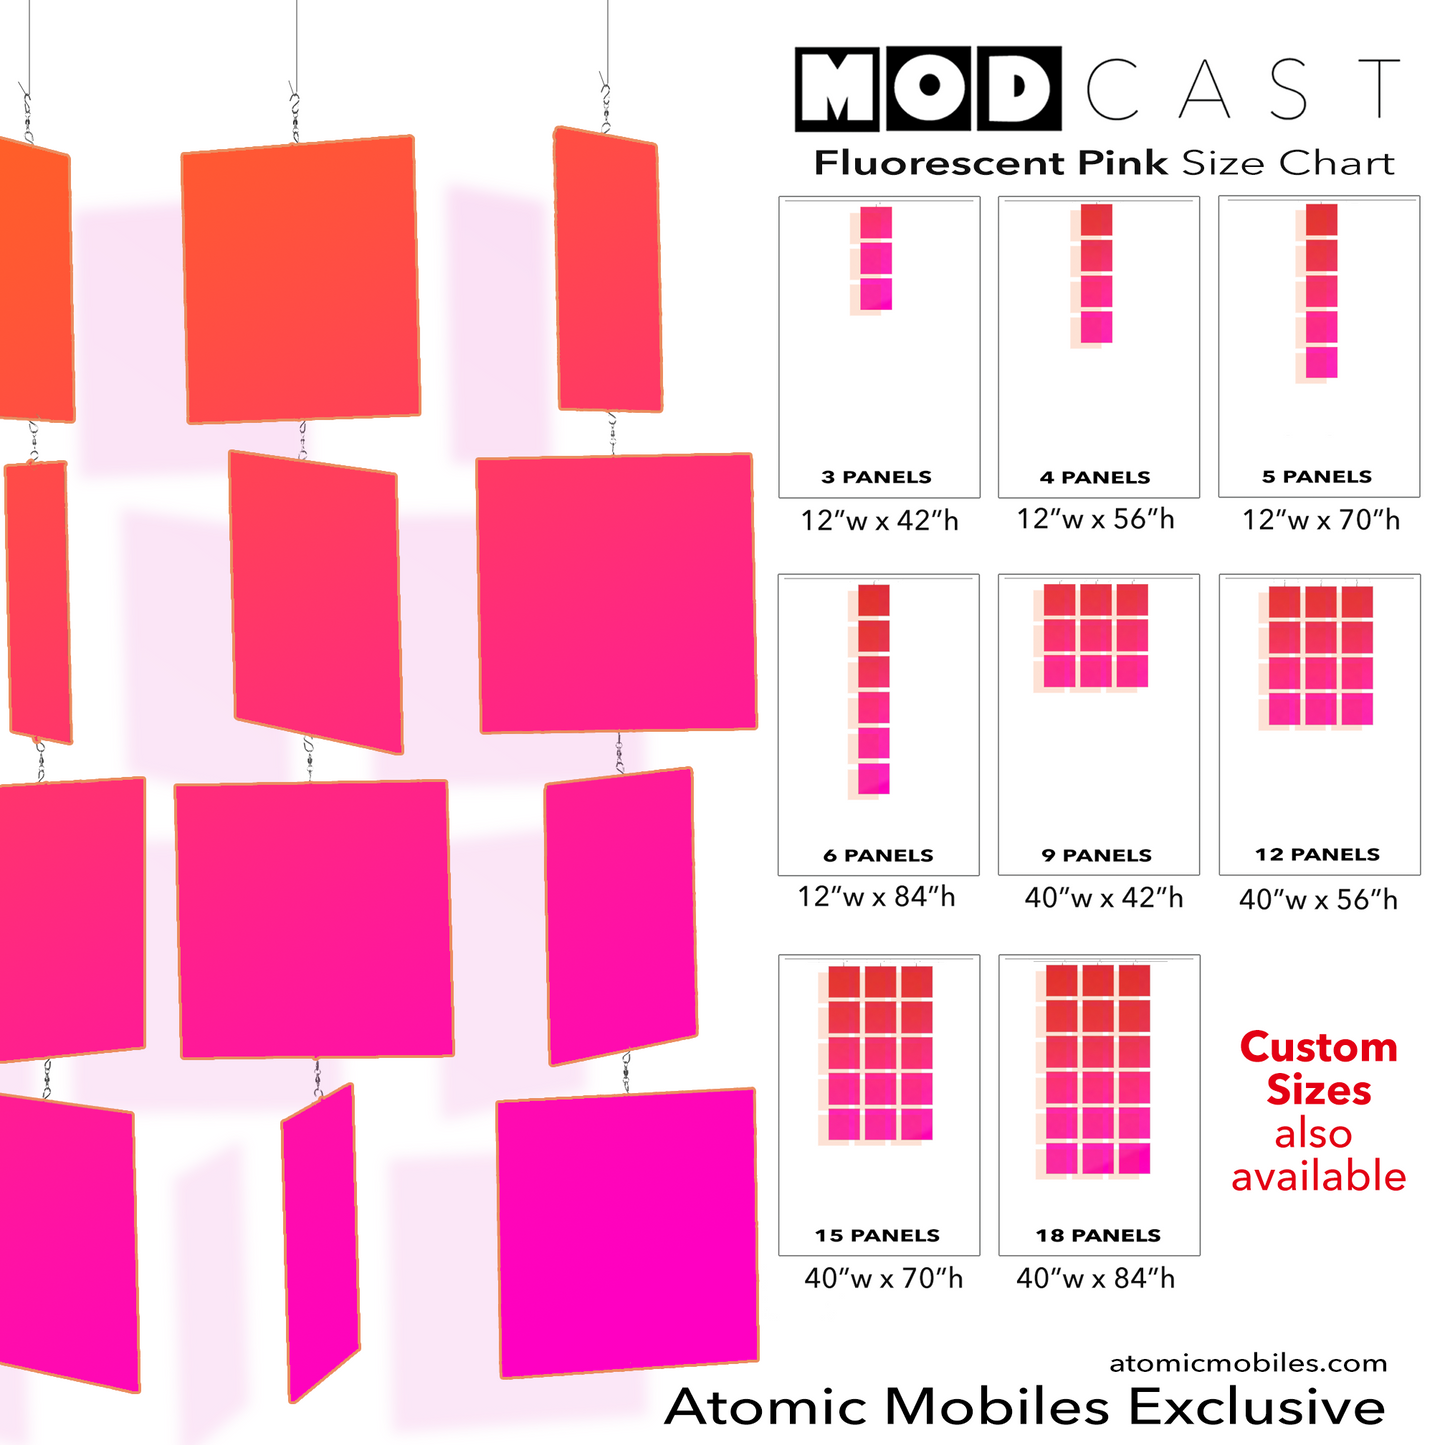 Fluorescent Hot Pink MODcast mid century modern inspired hanging art mobiles by AtomicMobiles.com